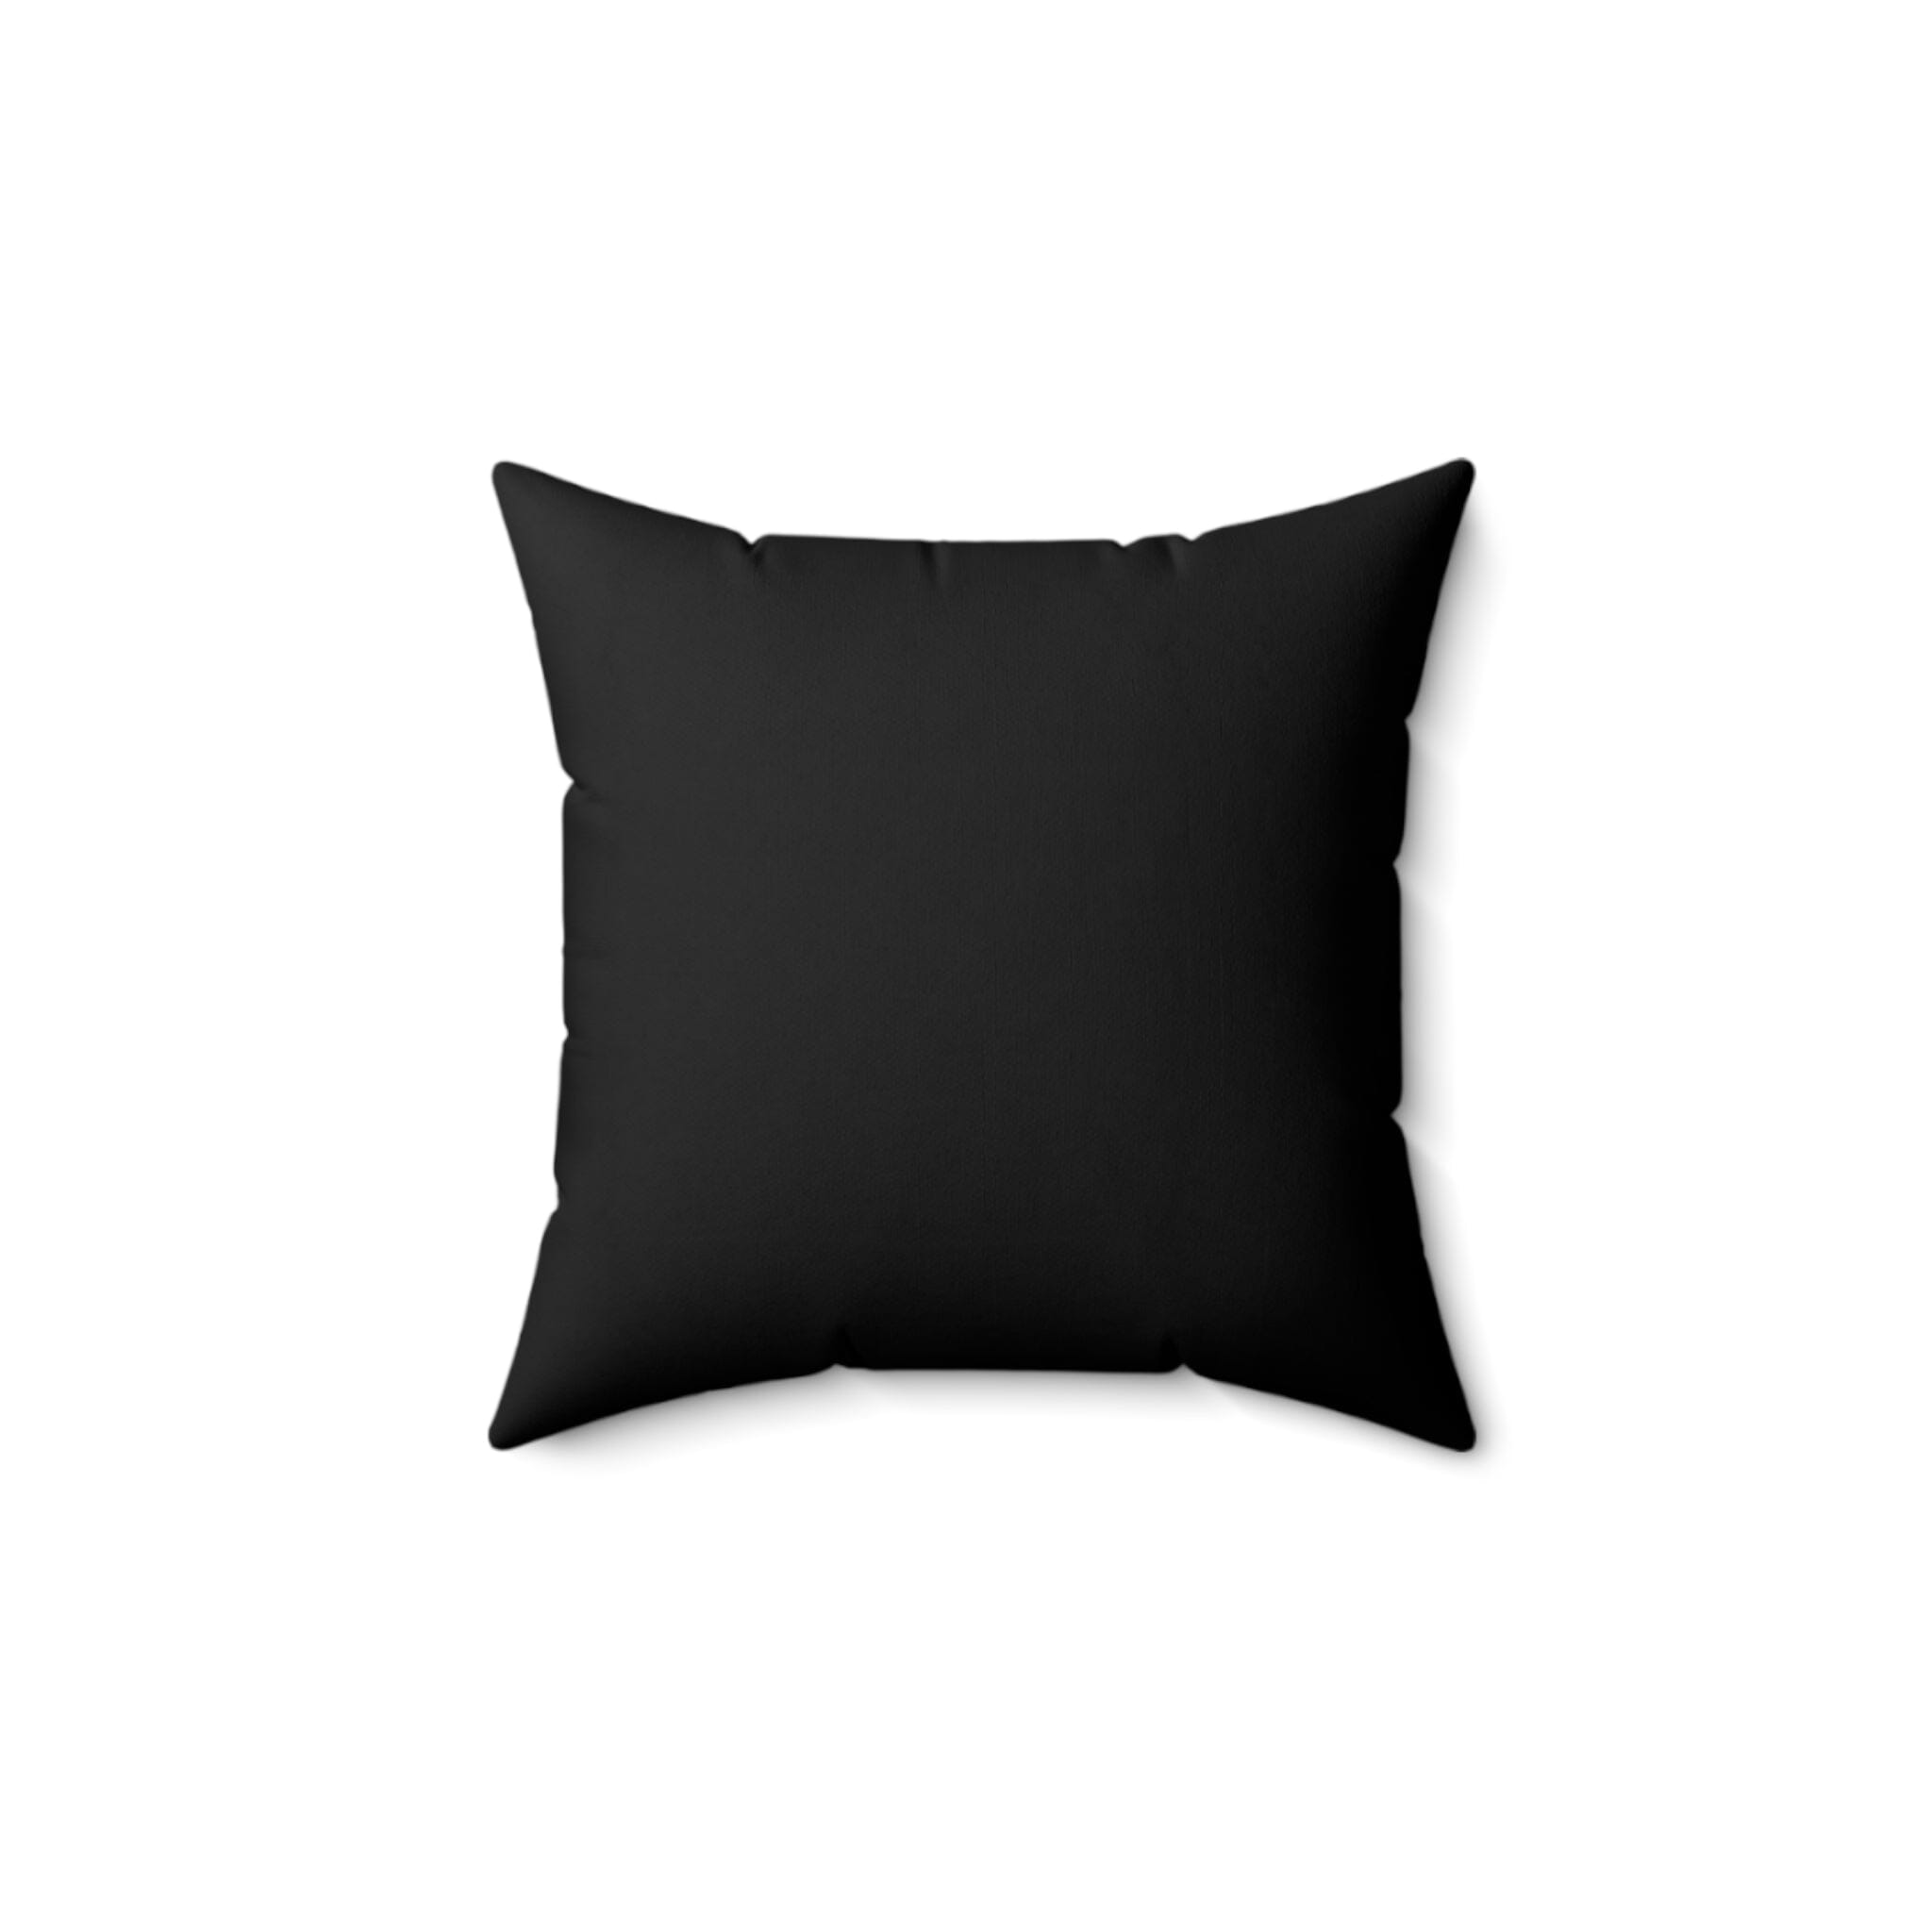 I'm Too Autistic for This Sh*t Pillow Home Decor The Autistic Innovator 